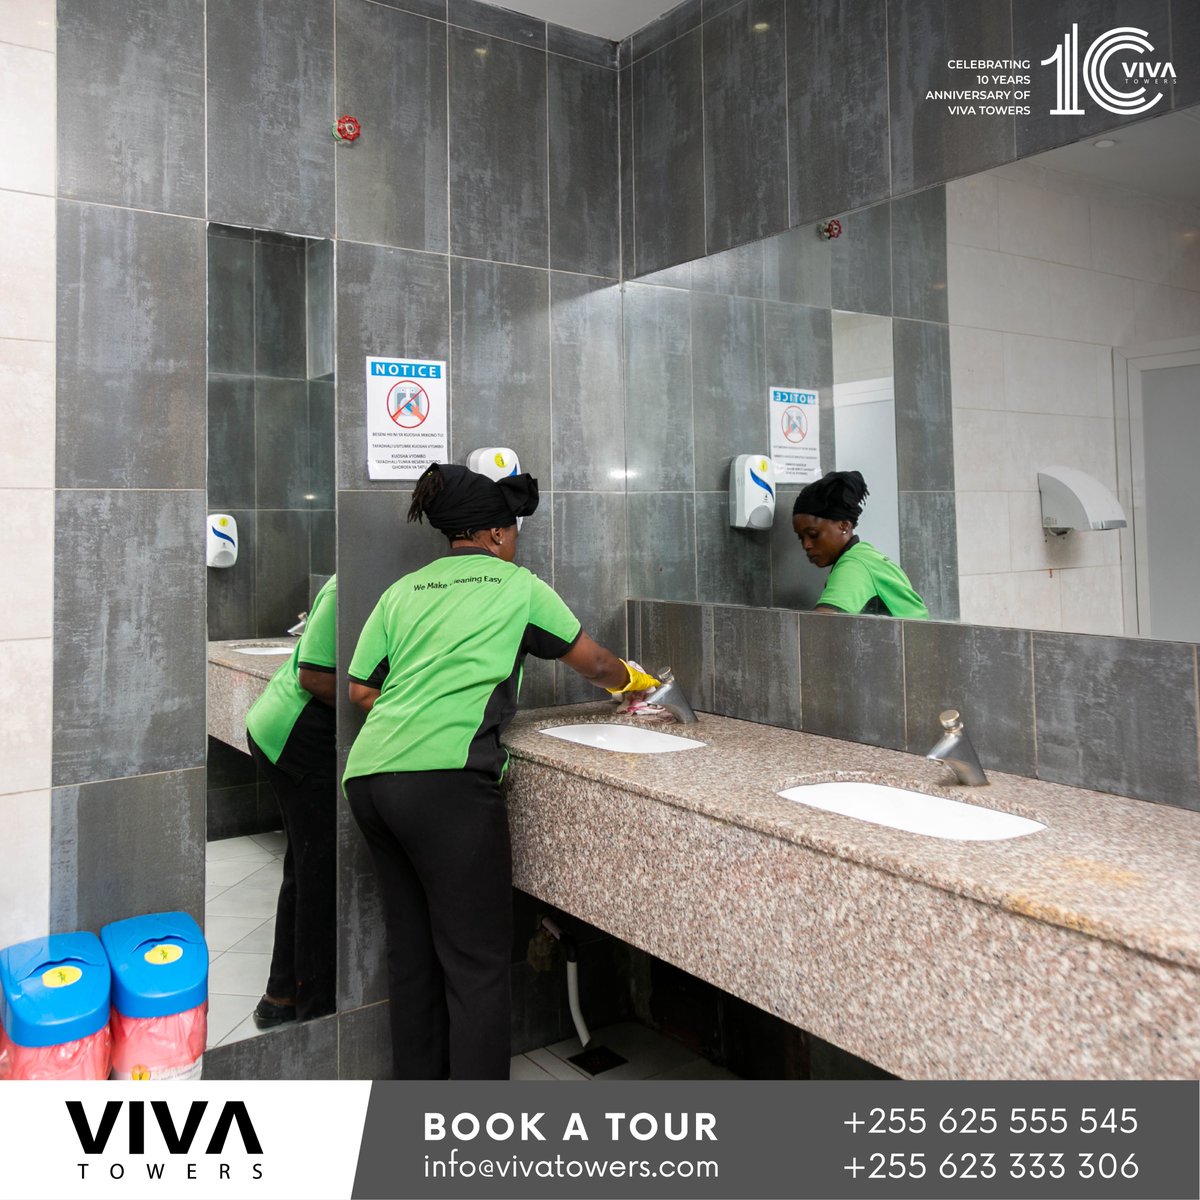 Hygiene excellence at its finest: Rest assured of our dedication to maintaining a healthy environment.
 #vivatowers #vivatowers10years #10yearsanniversary #officespaces #officespace #Apartment #building #shopspaces #property #daressalaam